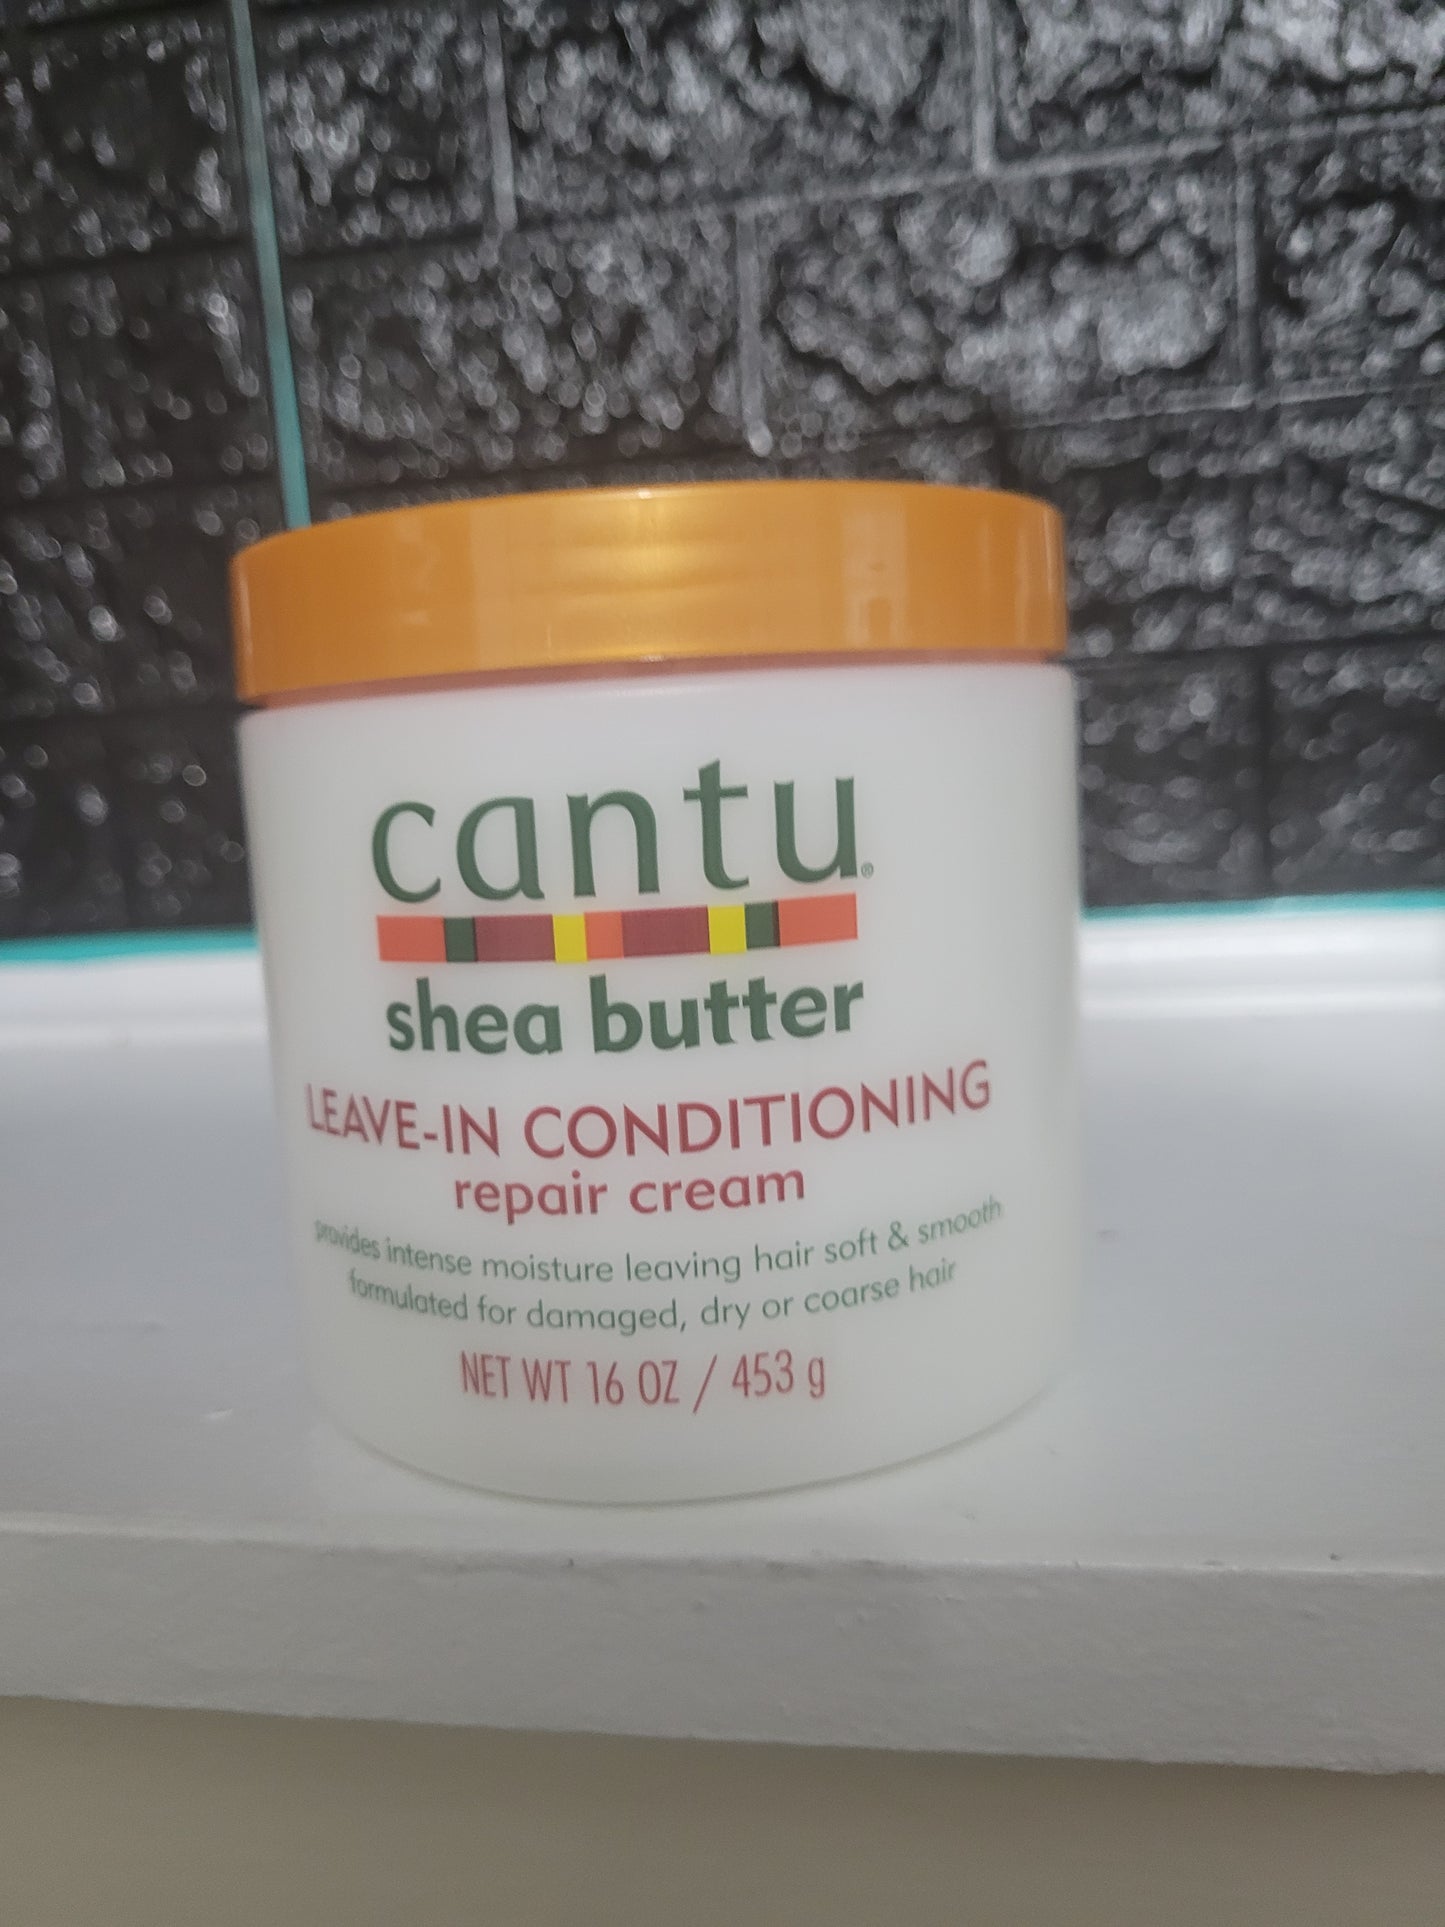 Leave in conditioner